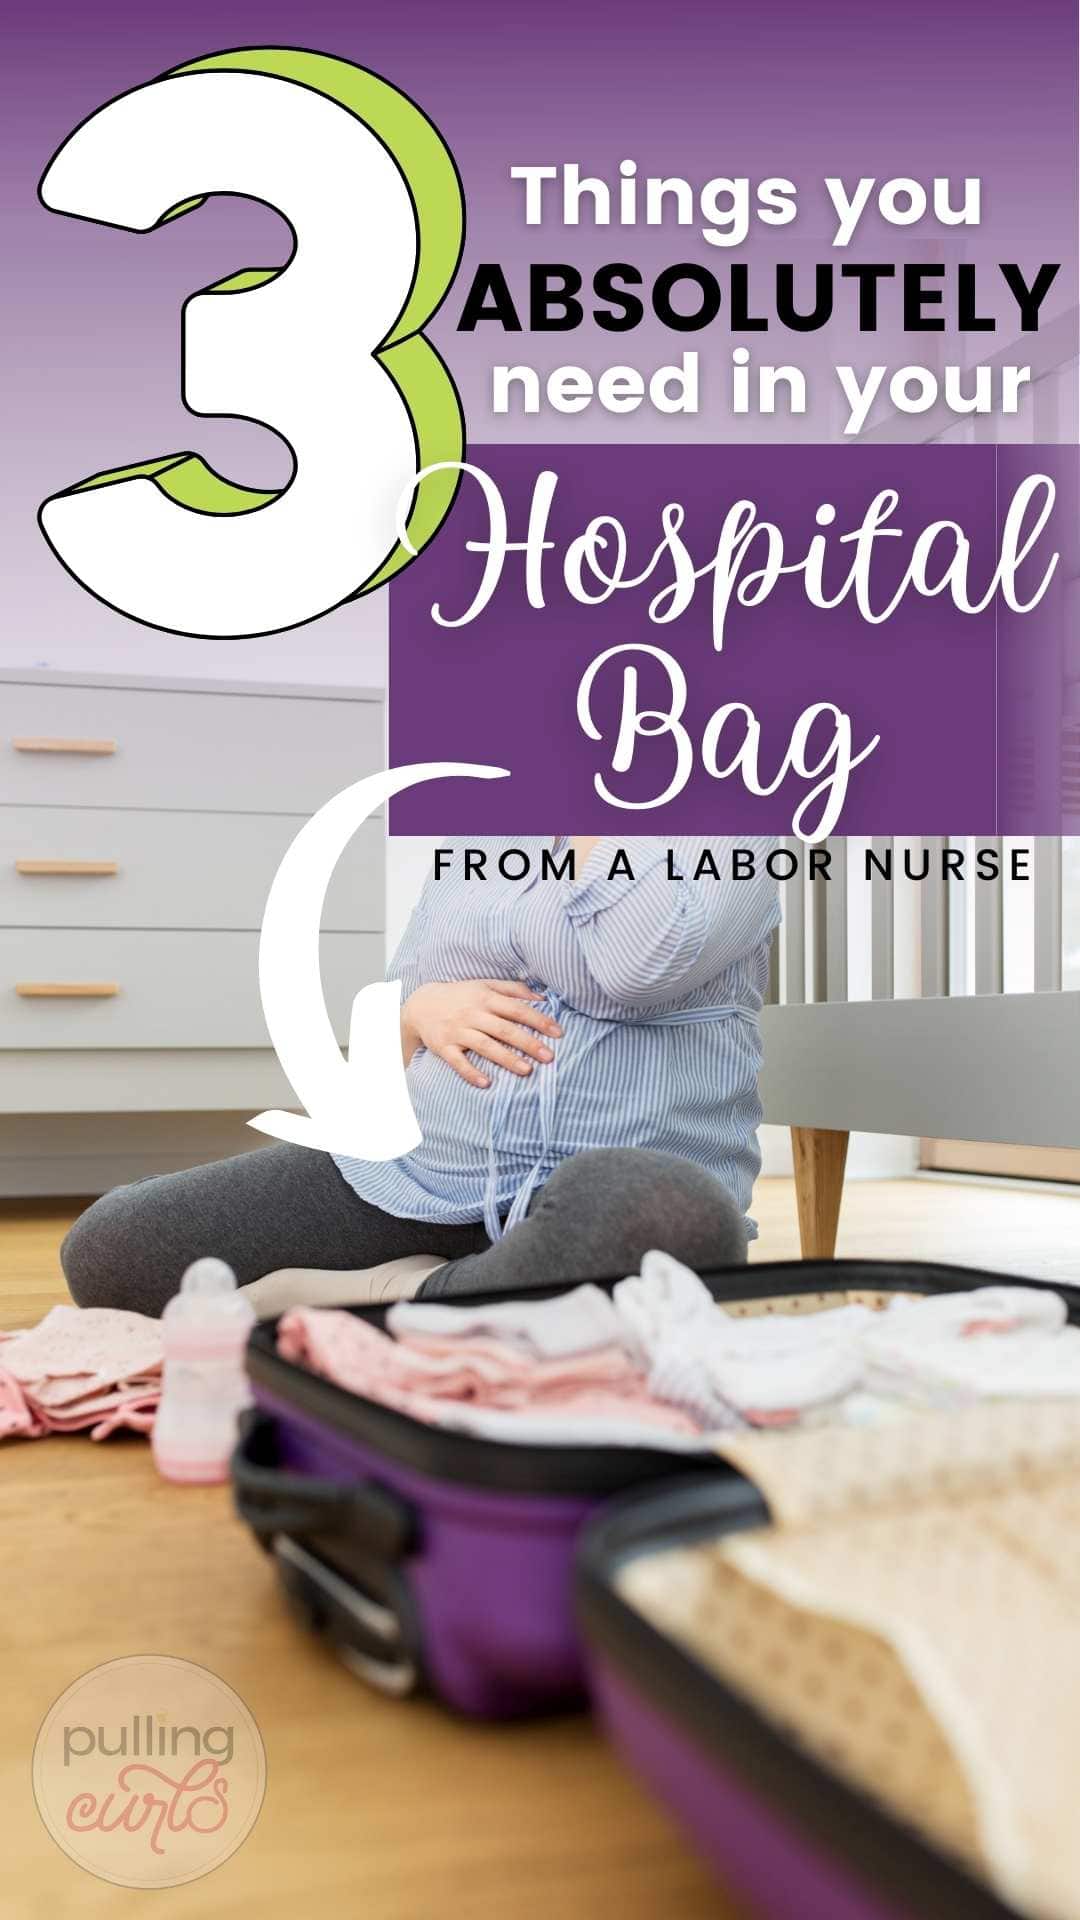 What are the three thigns you need at a momen's notice in the hospital? via @pullingcurls